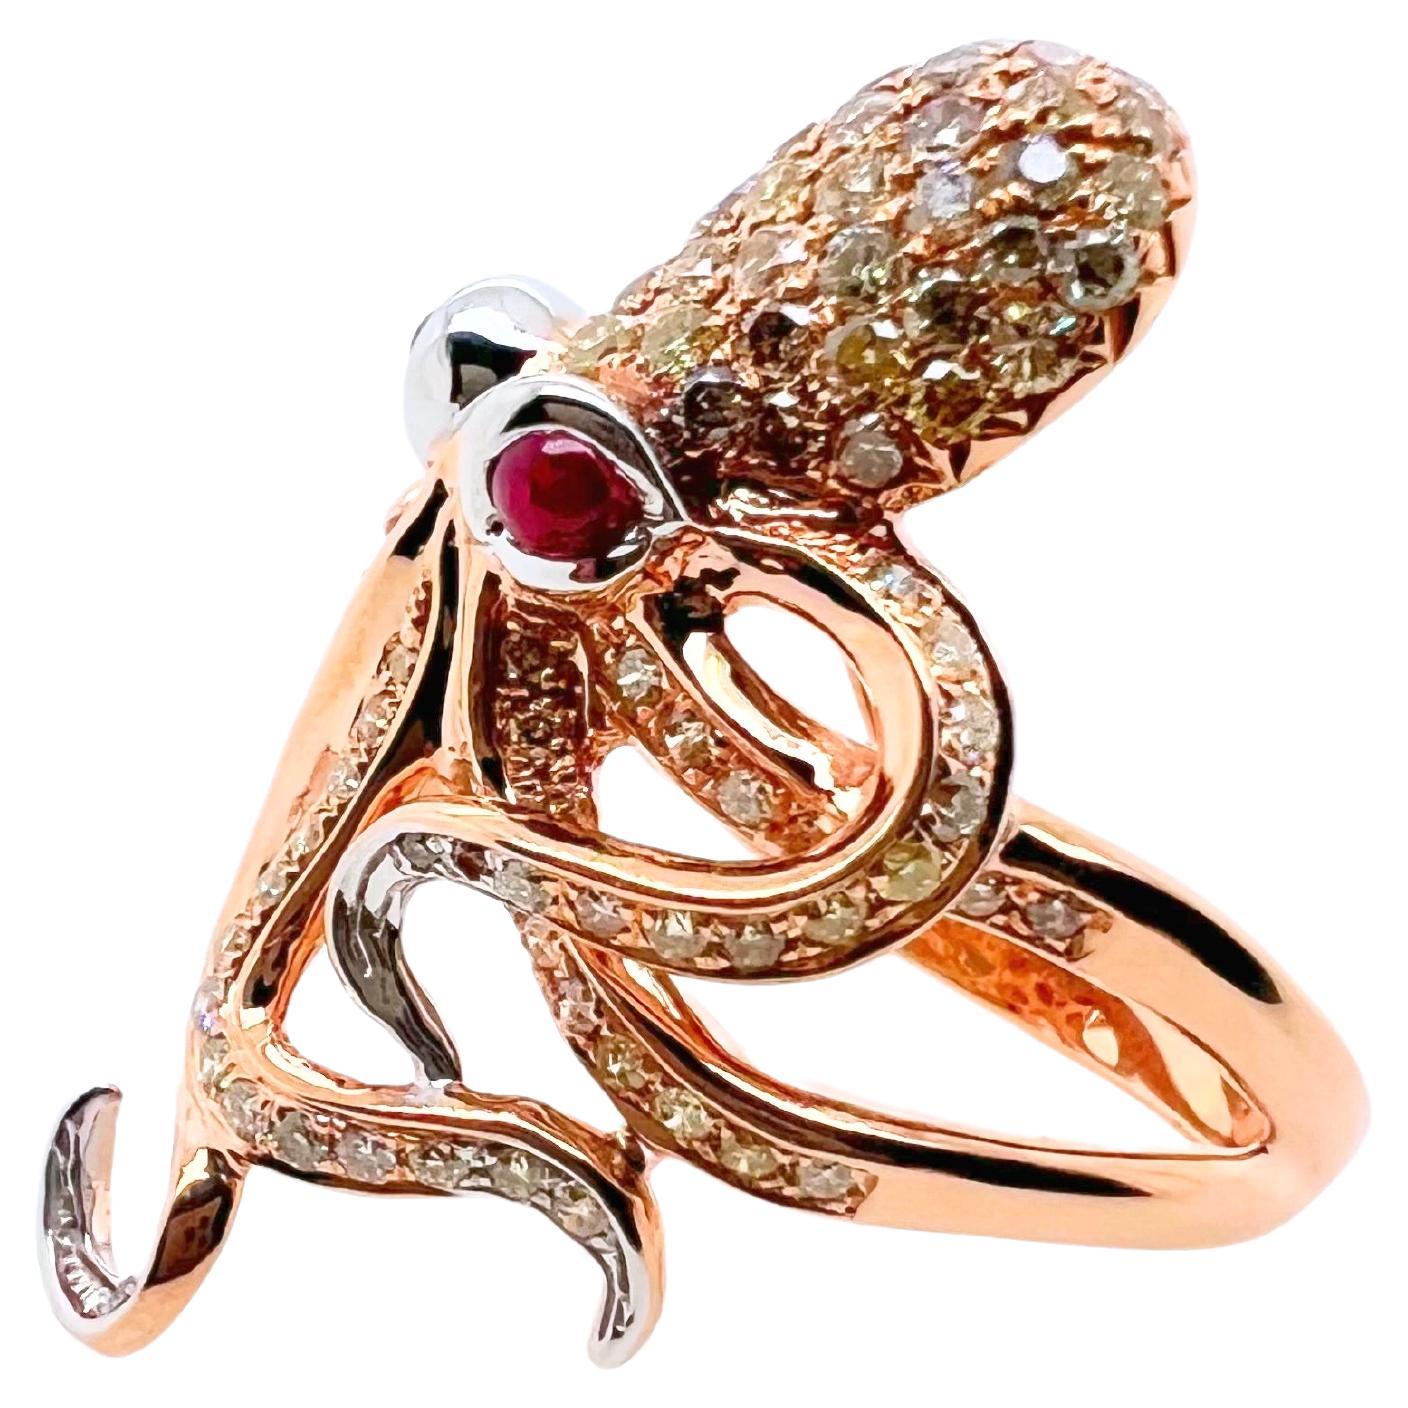 This unique ring is an art on finger.  The intricate details of this octopus ring will leave you speechless.  The octopus body is made of 18k rose gold with the ruby cabochon eyes that are set in 18k white gold.  The diamonds are set in a pavé set